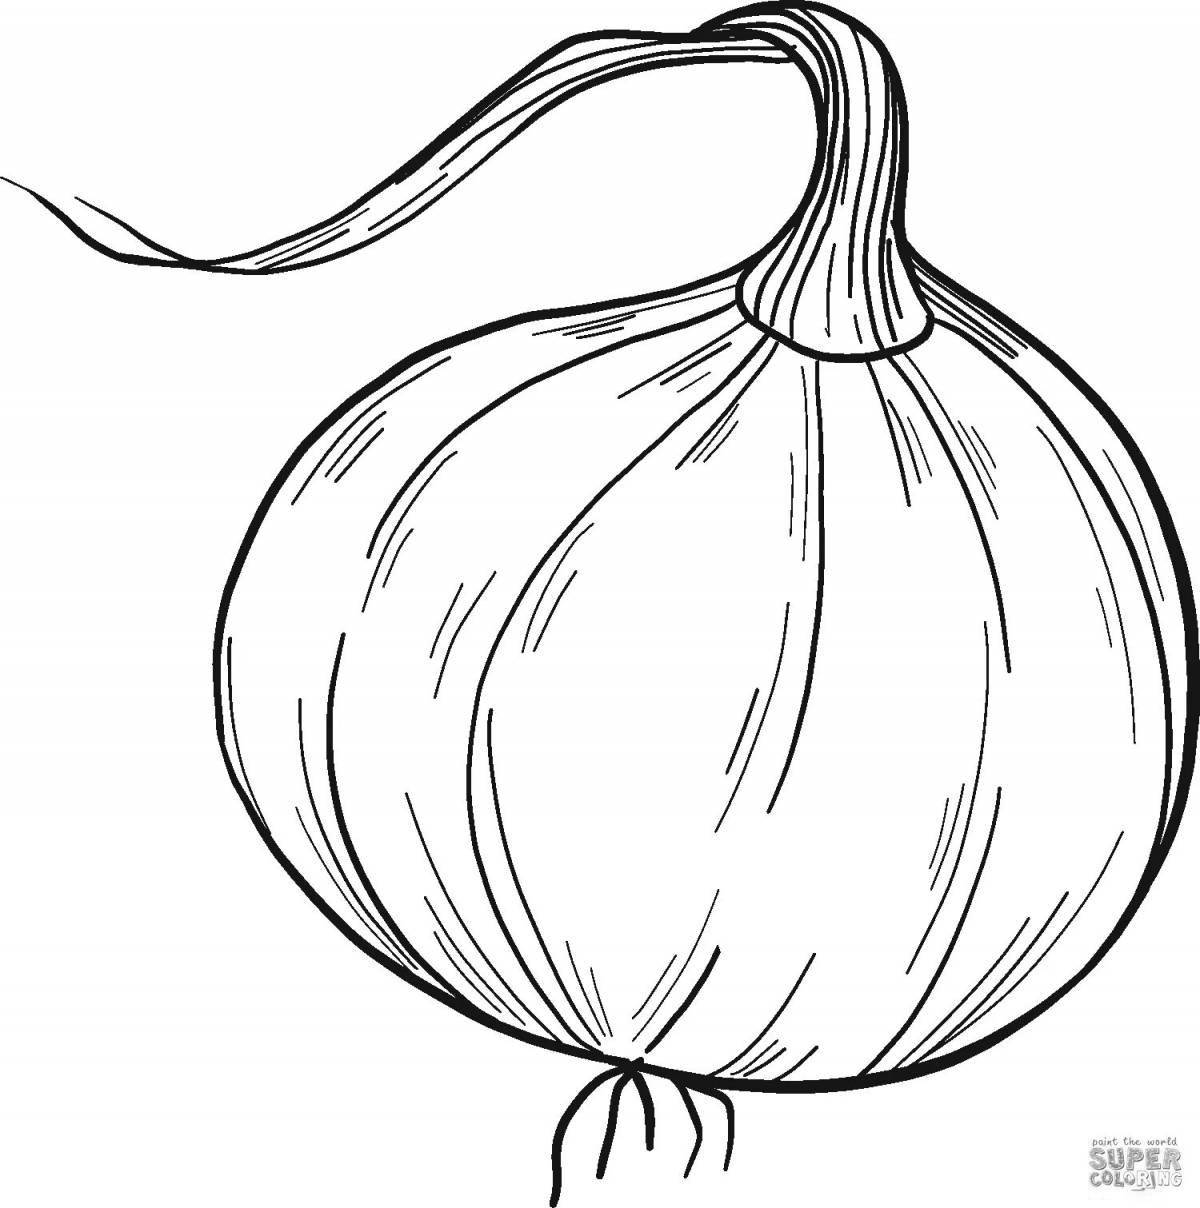 Rubber green onion coloring page